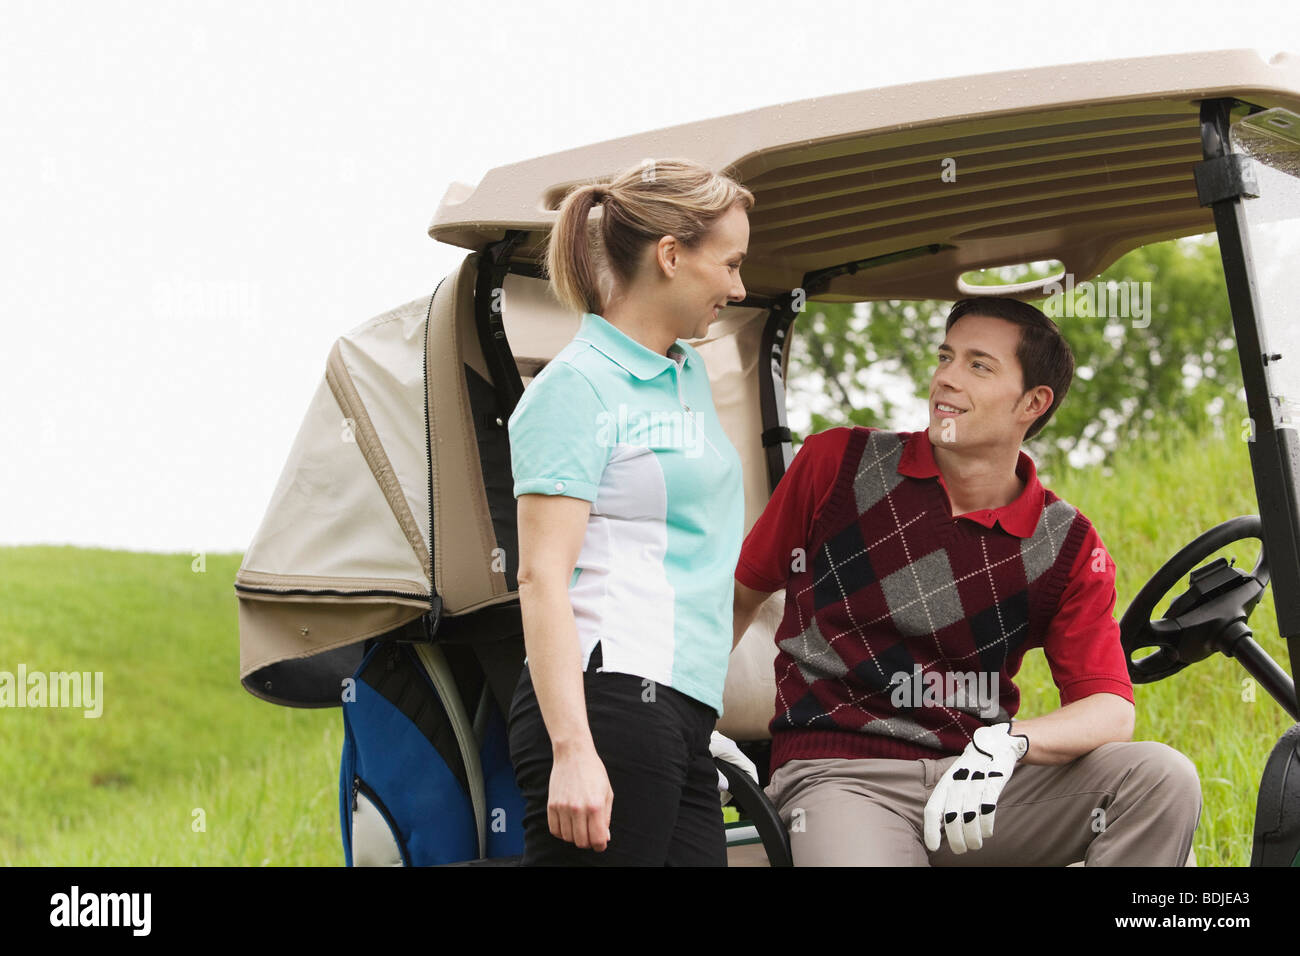 Couple with Golf Cart on Golf Course Stock Photo